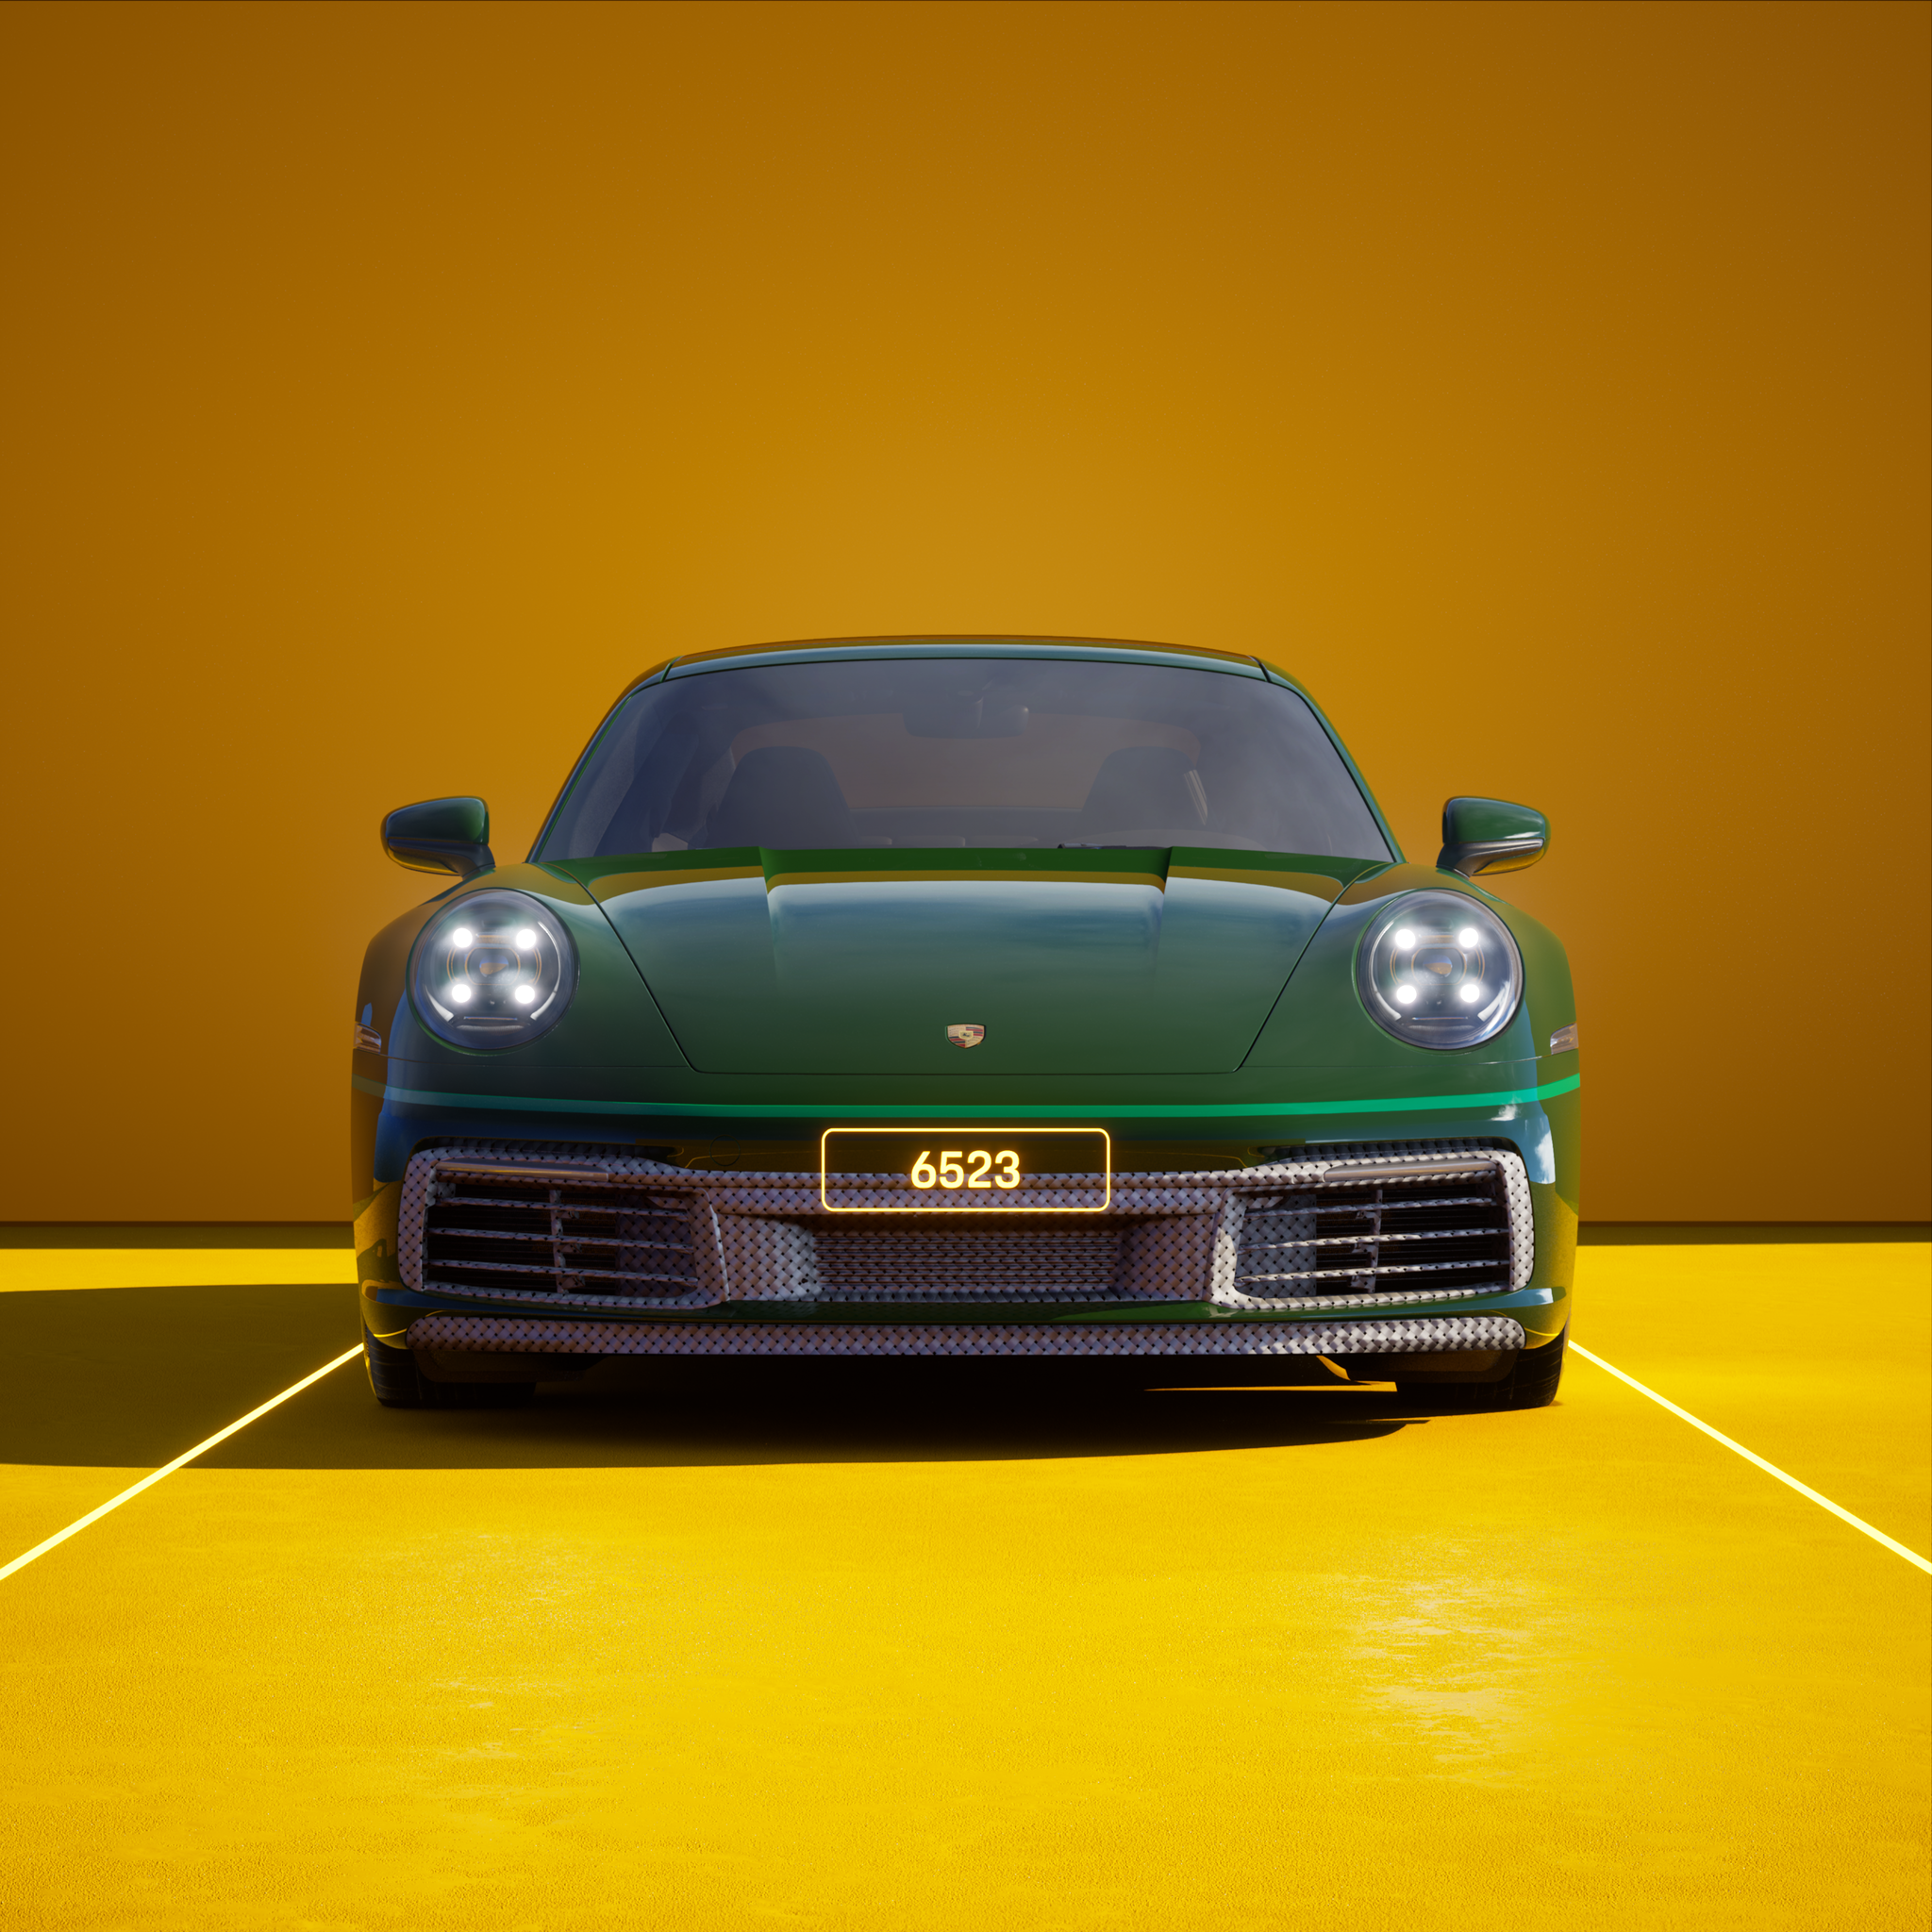 The PORSCHΞ 911 6523 image in phase